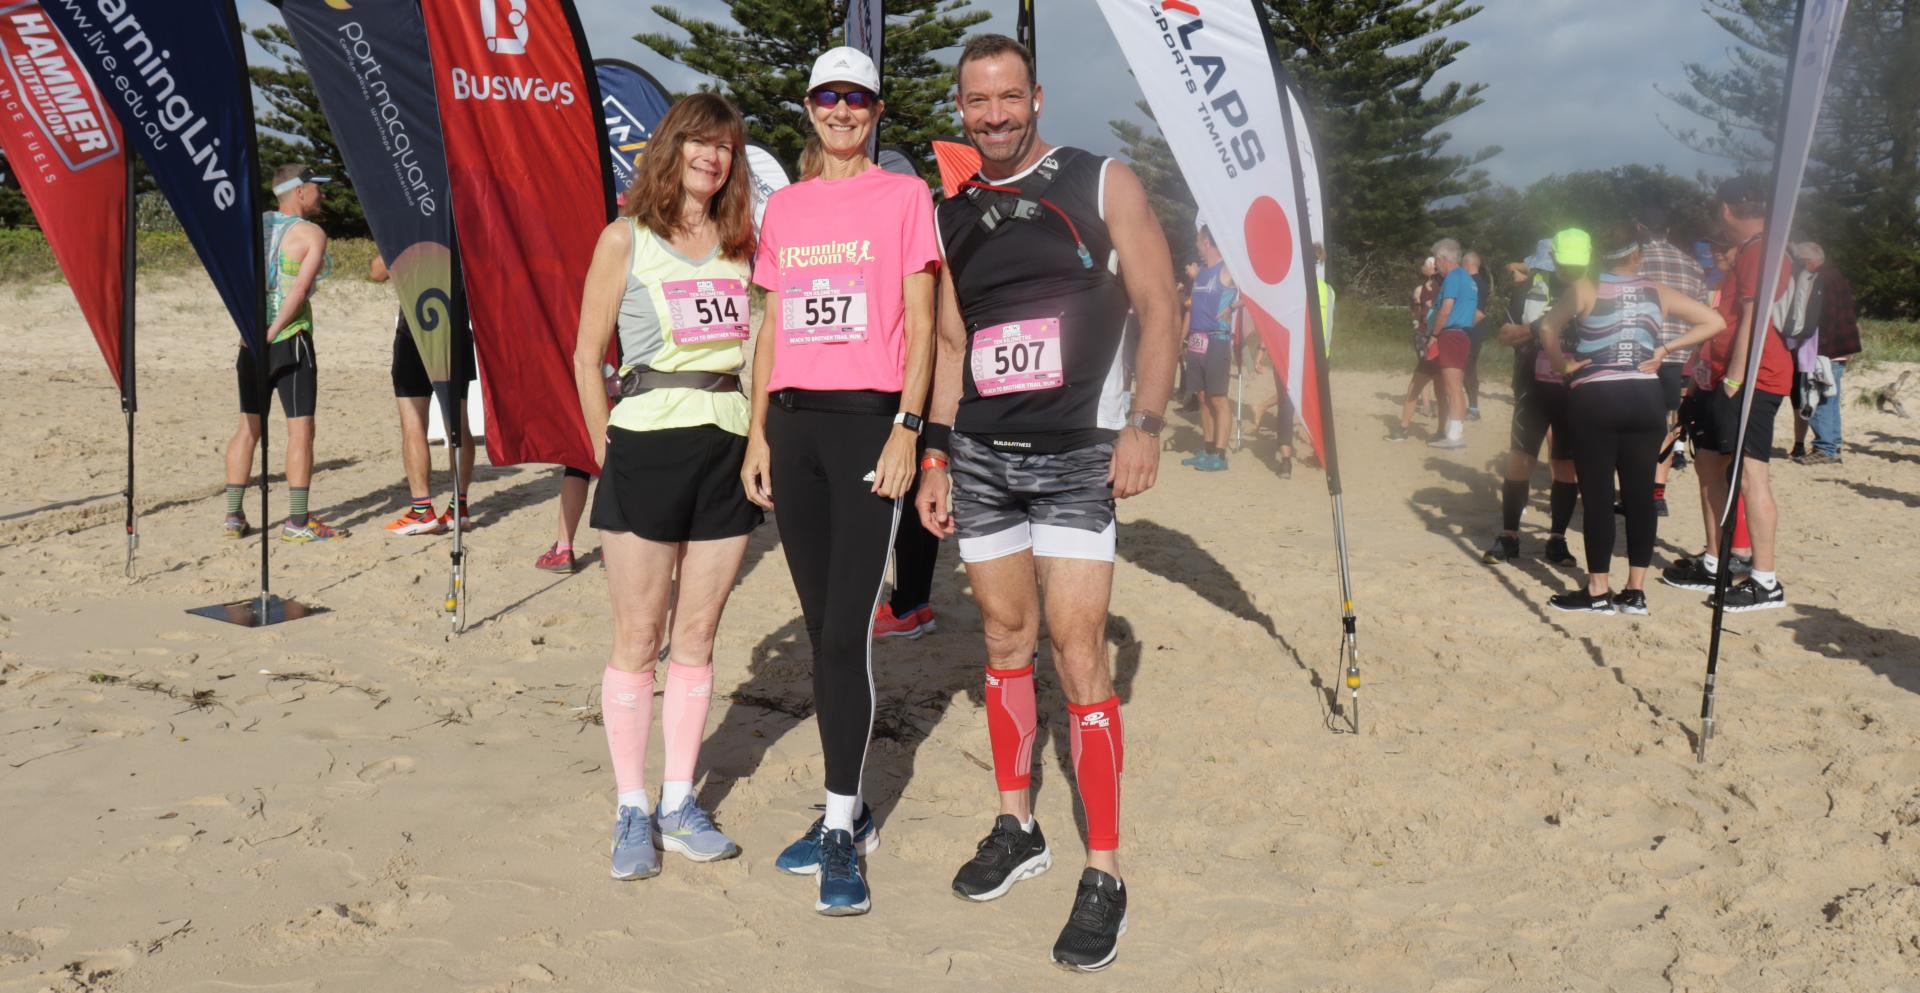 Busways backs Port Macquarie’s favourite trail running festival, Beach to Brother!